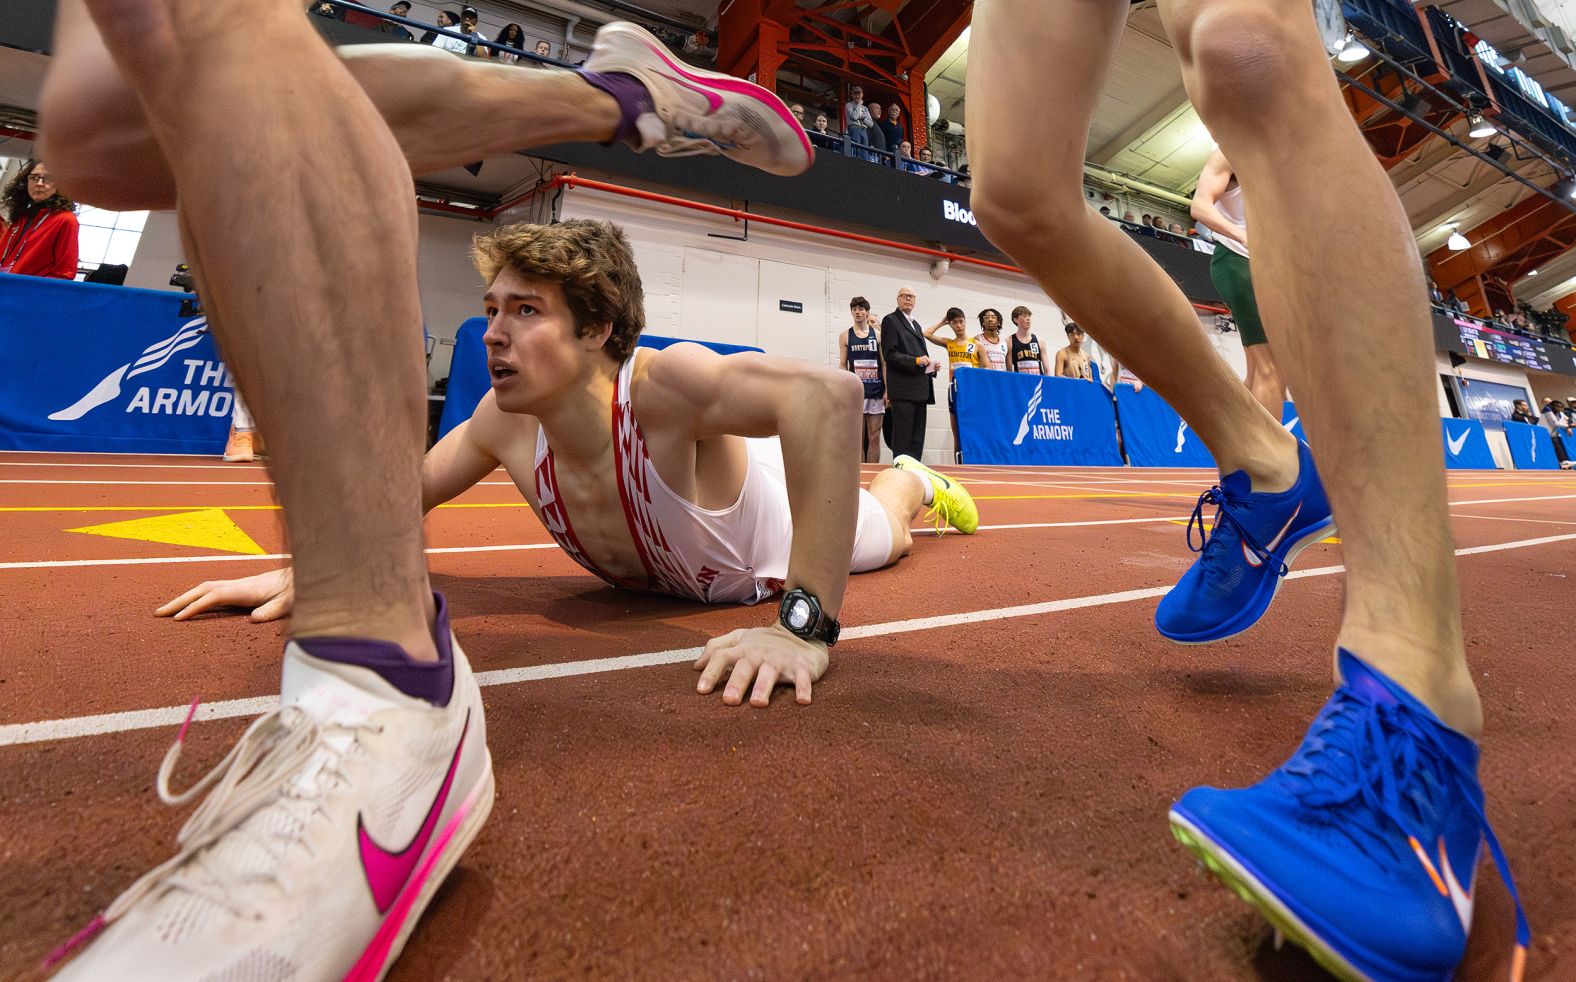 A runner takes a tumble during a relay race at the Millrose Games in New York on Sunday, February 11.